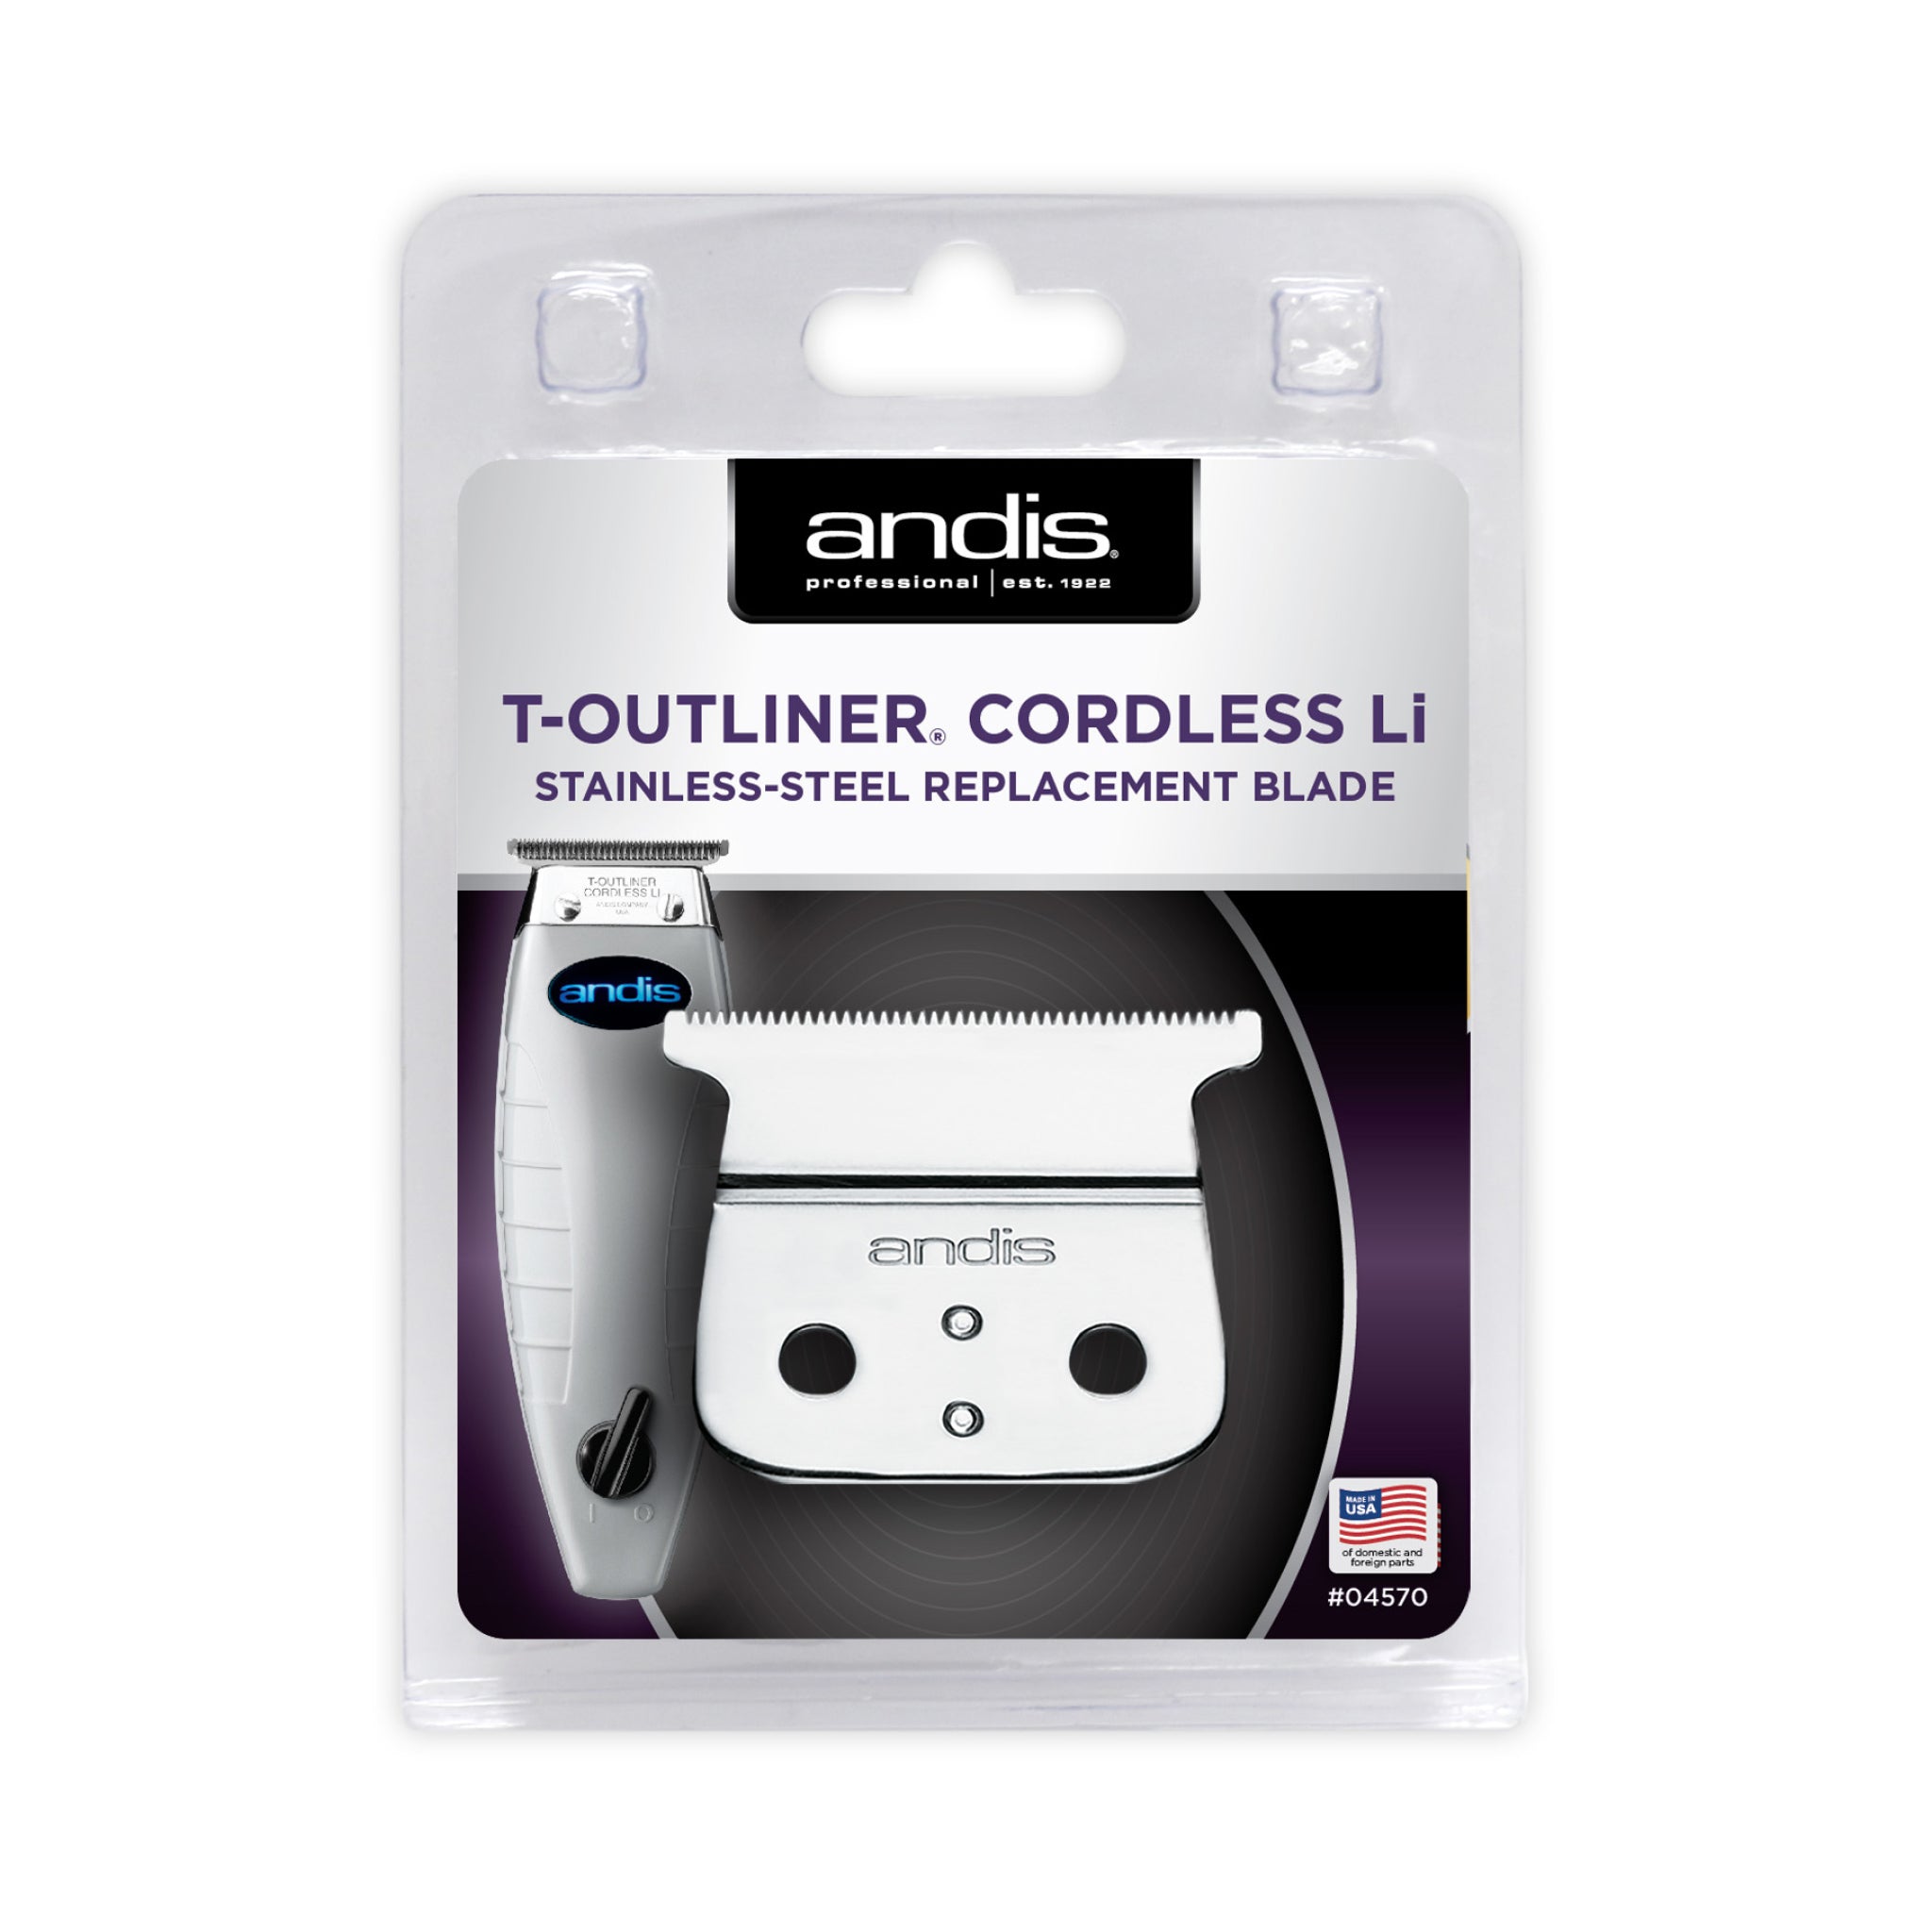 Andis T-Outliner Cordless Li Stainless Steel Replacement Blade